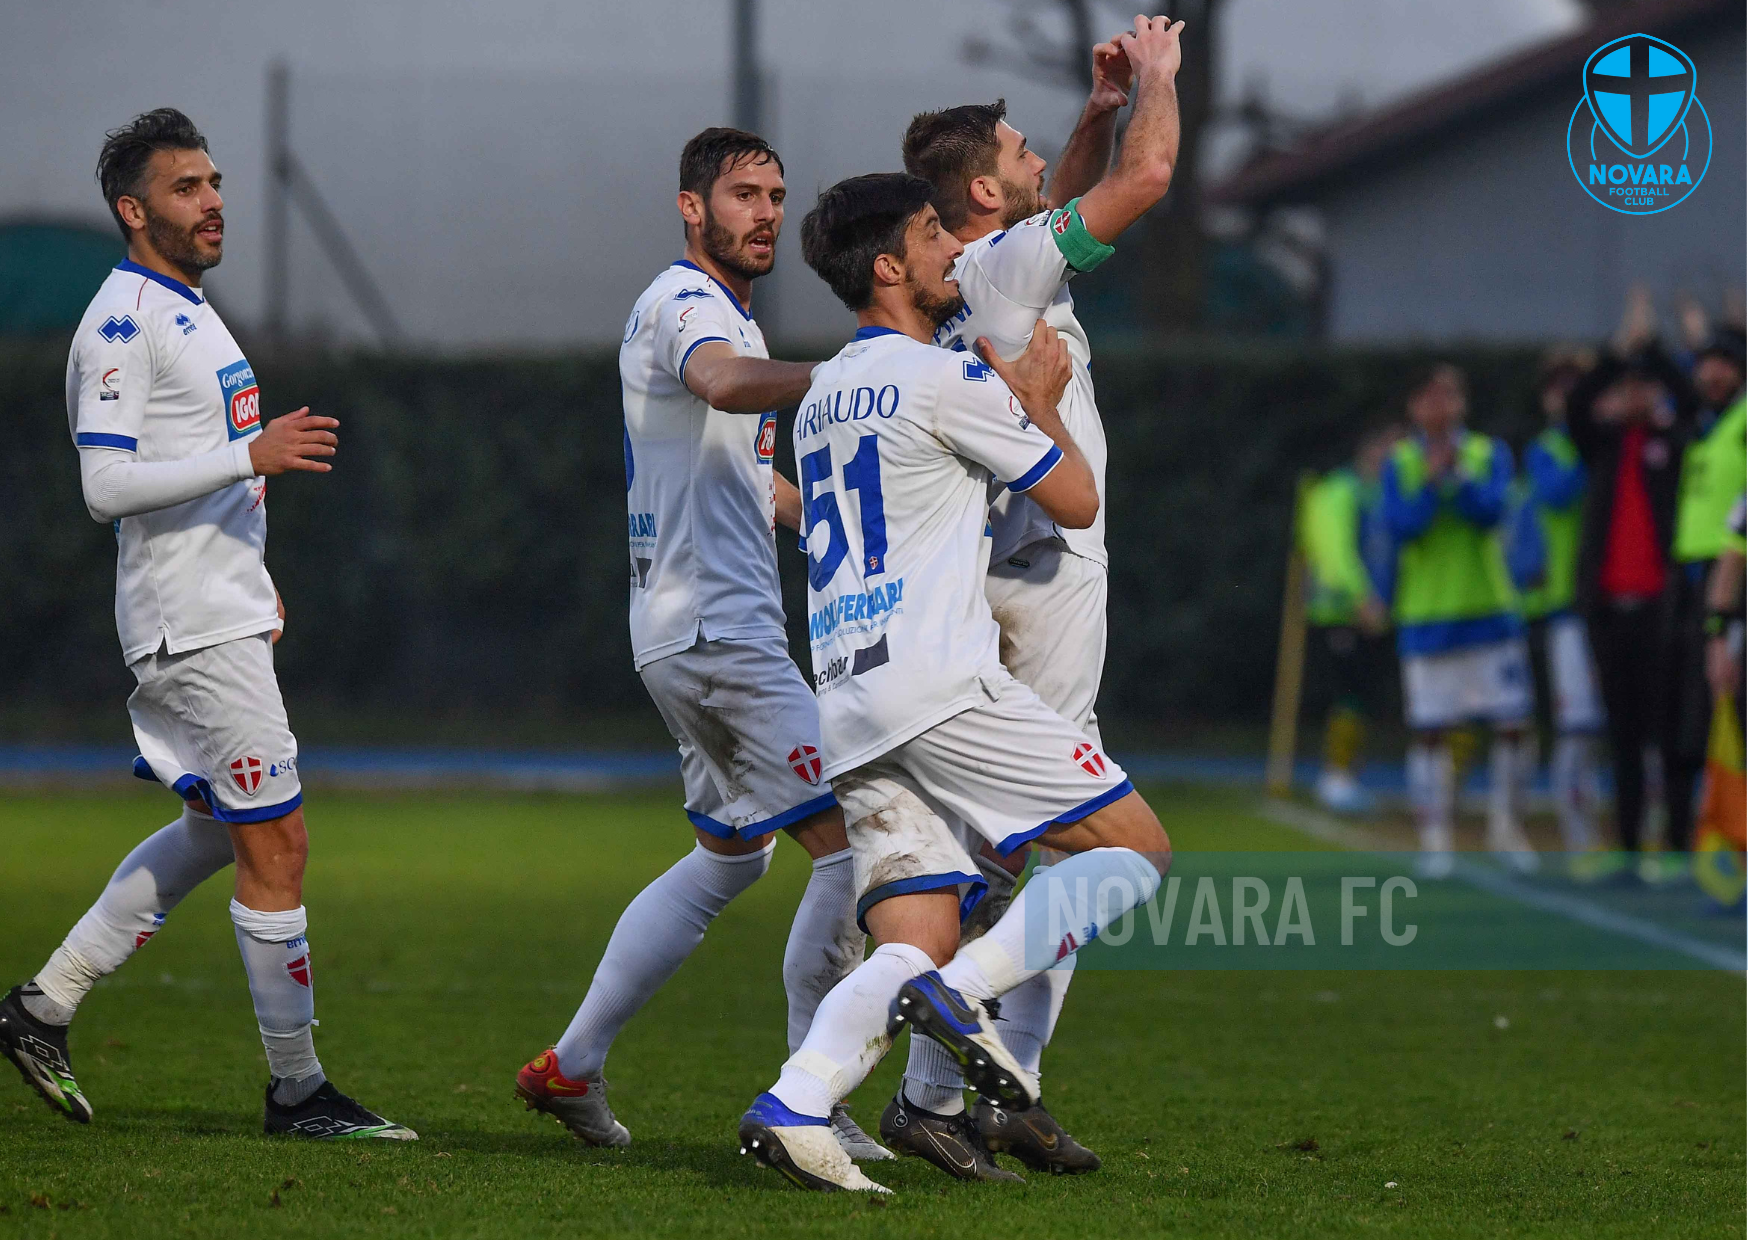 Read more about the article Sangiuliano City-Novara 0-1 | Gallery